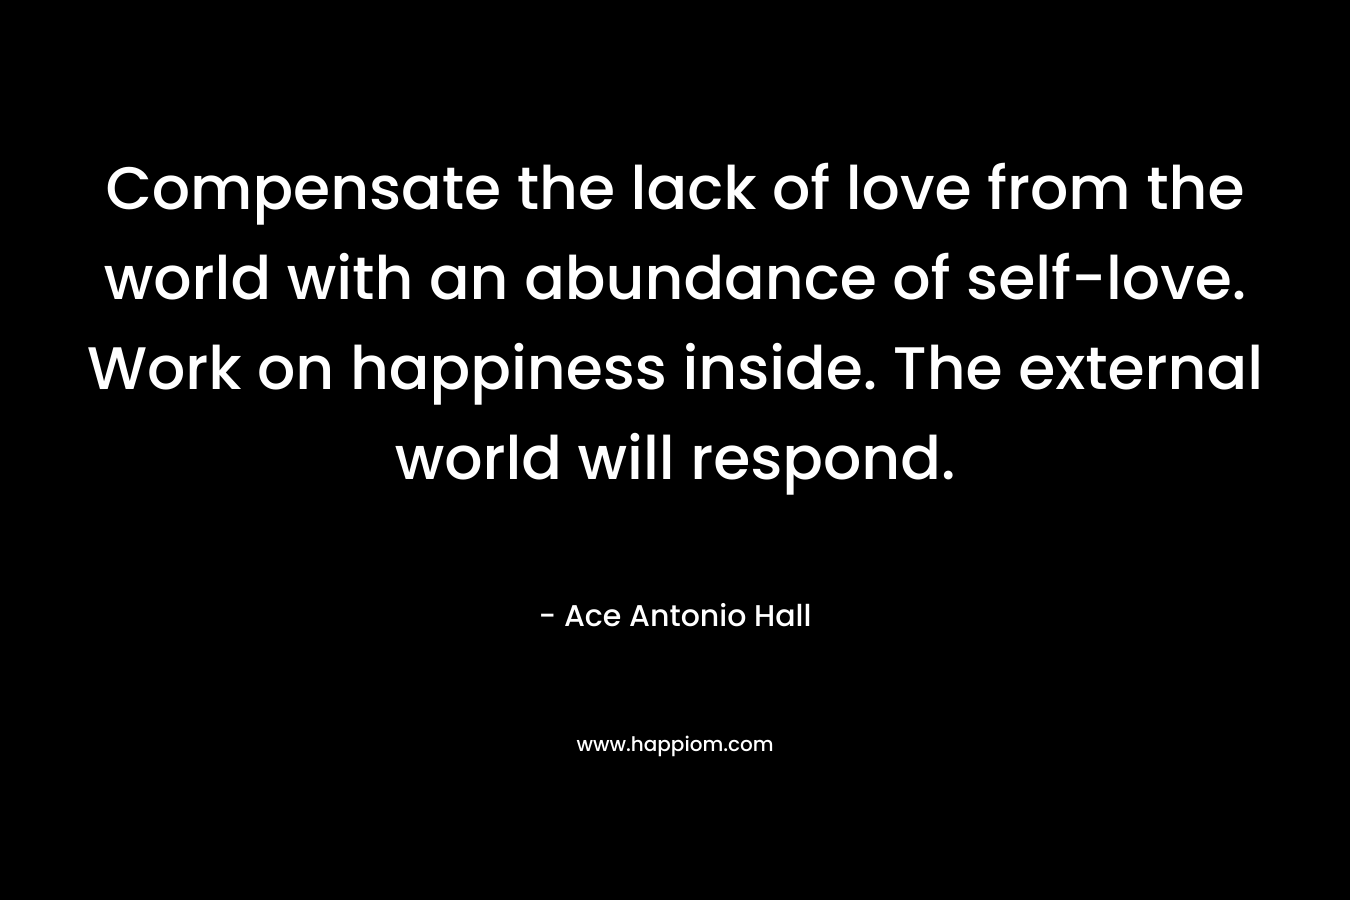 Compensate the lack of love from the world with an abundance of self-love. Work on happiness inside. The external world will respond.